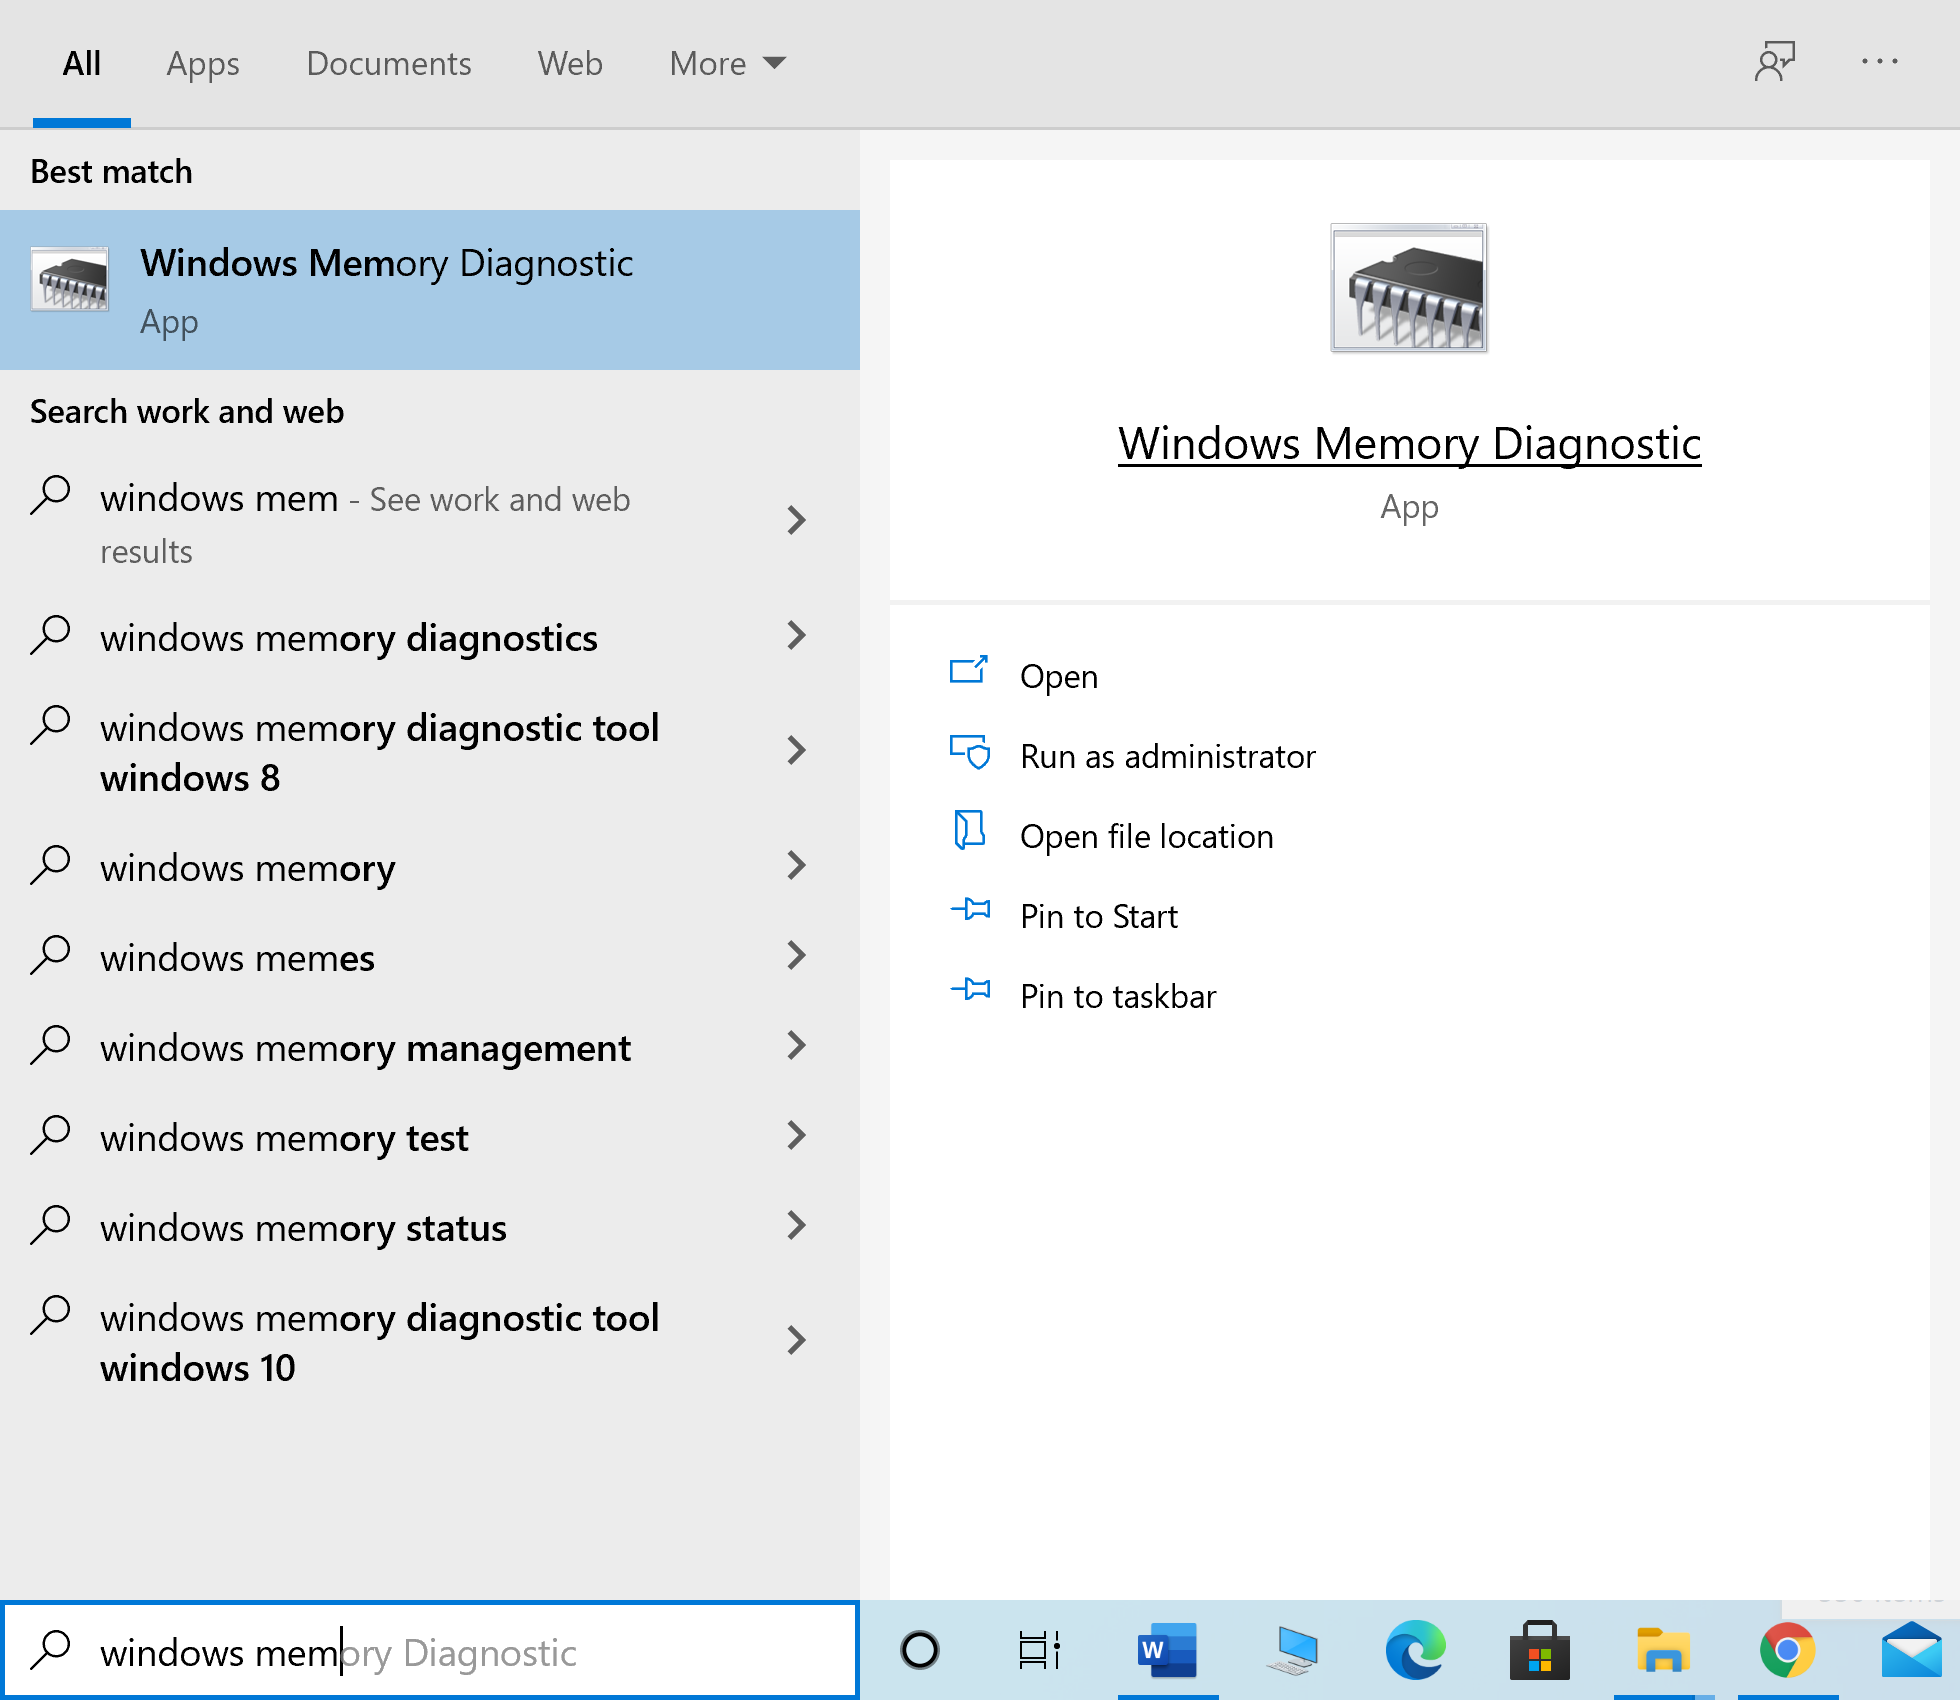 Type Windows Memory Diagnostic into Windows search and launch it from the search result